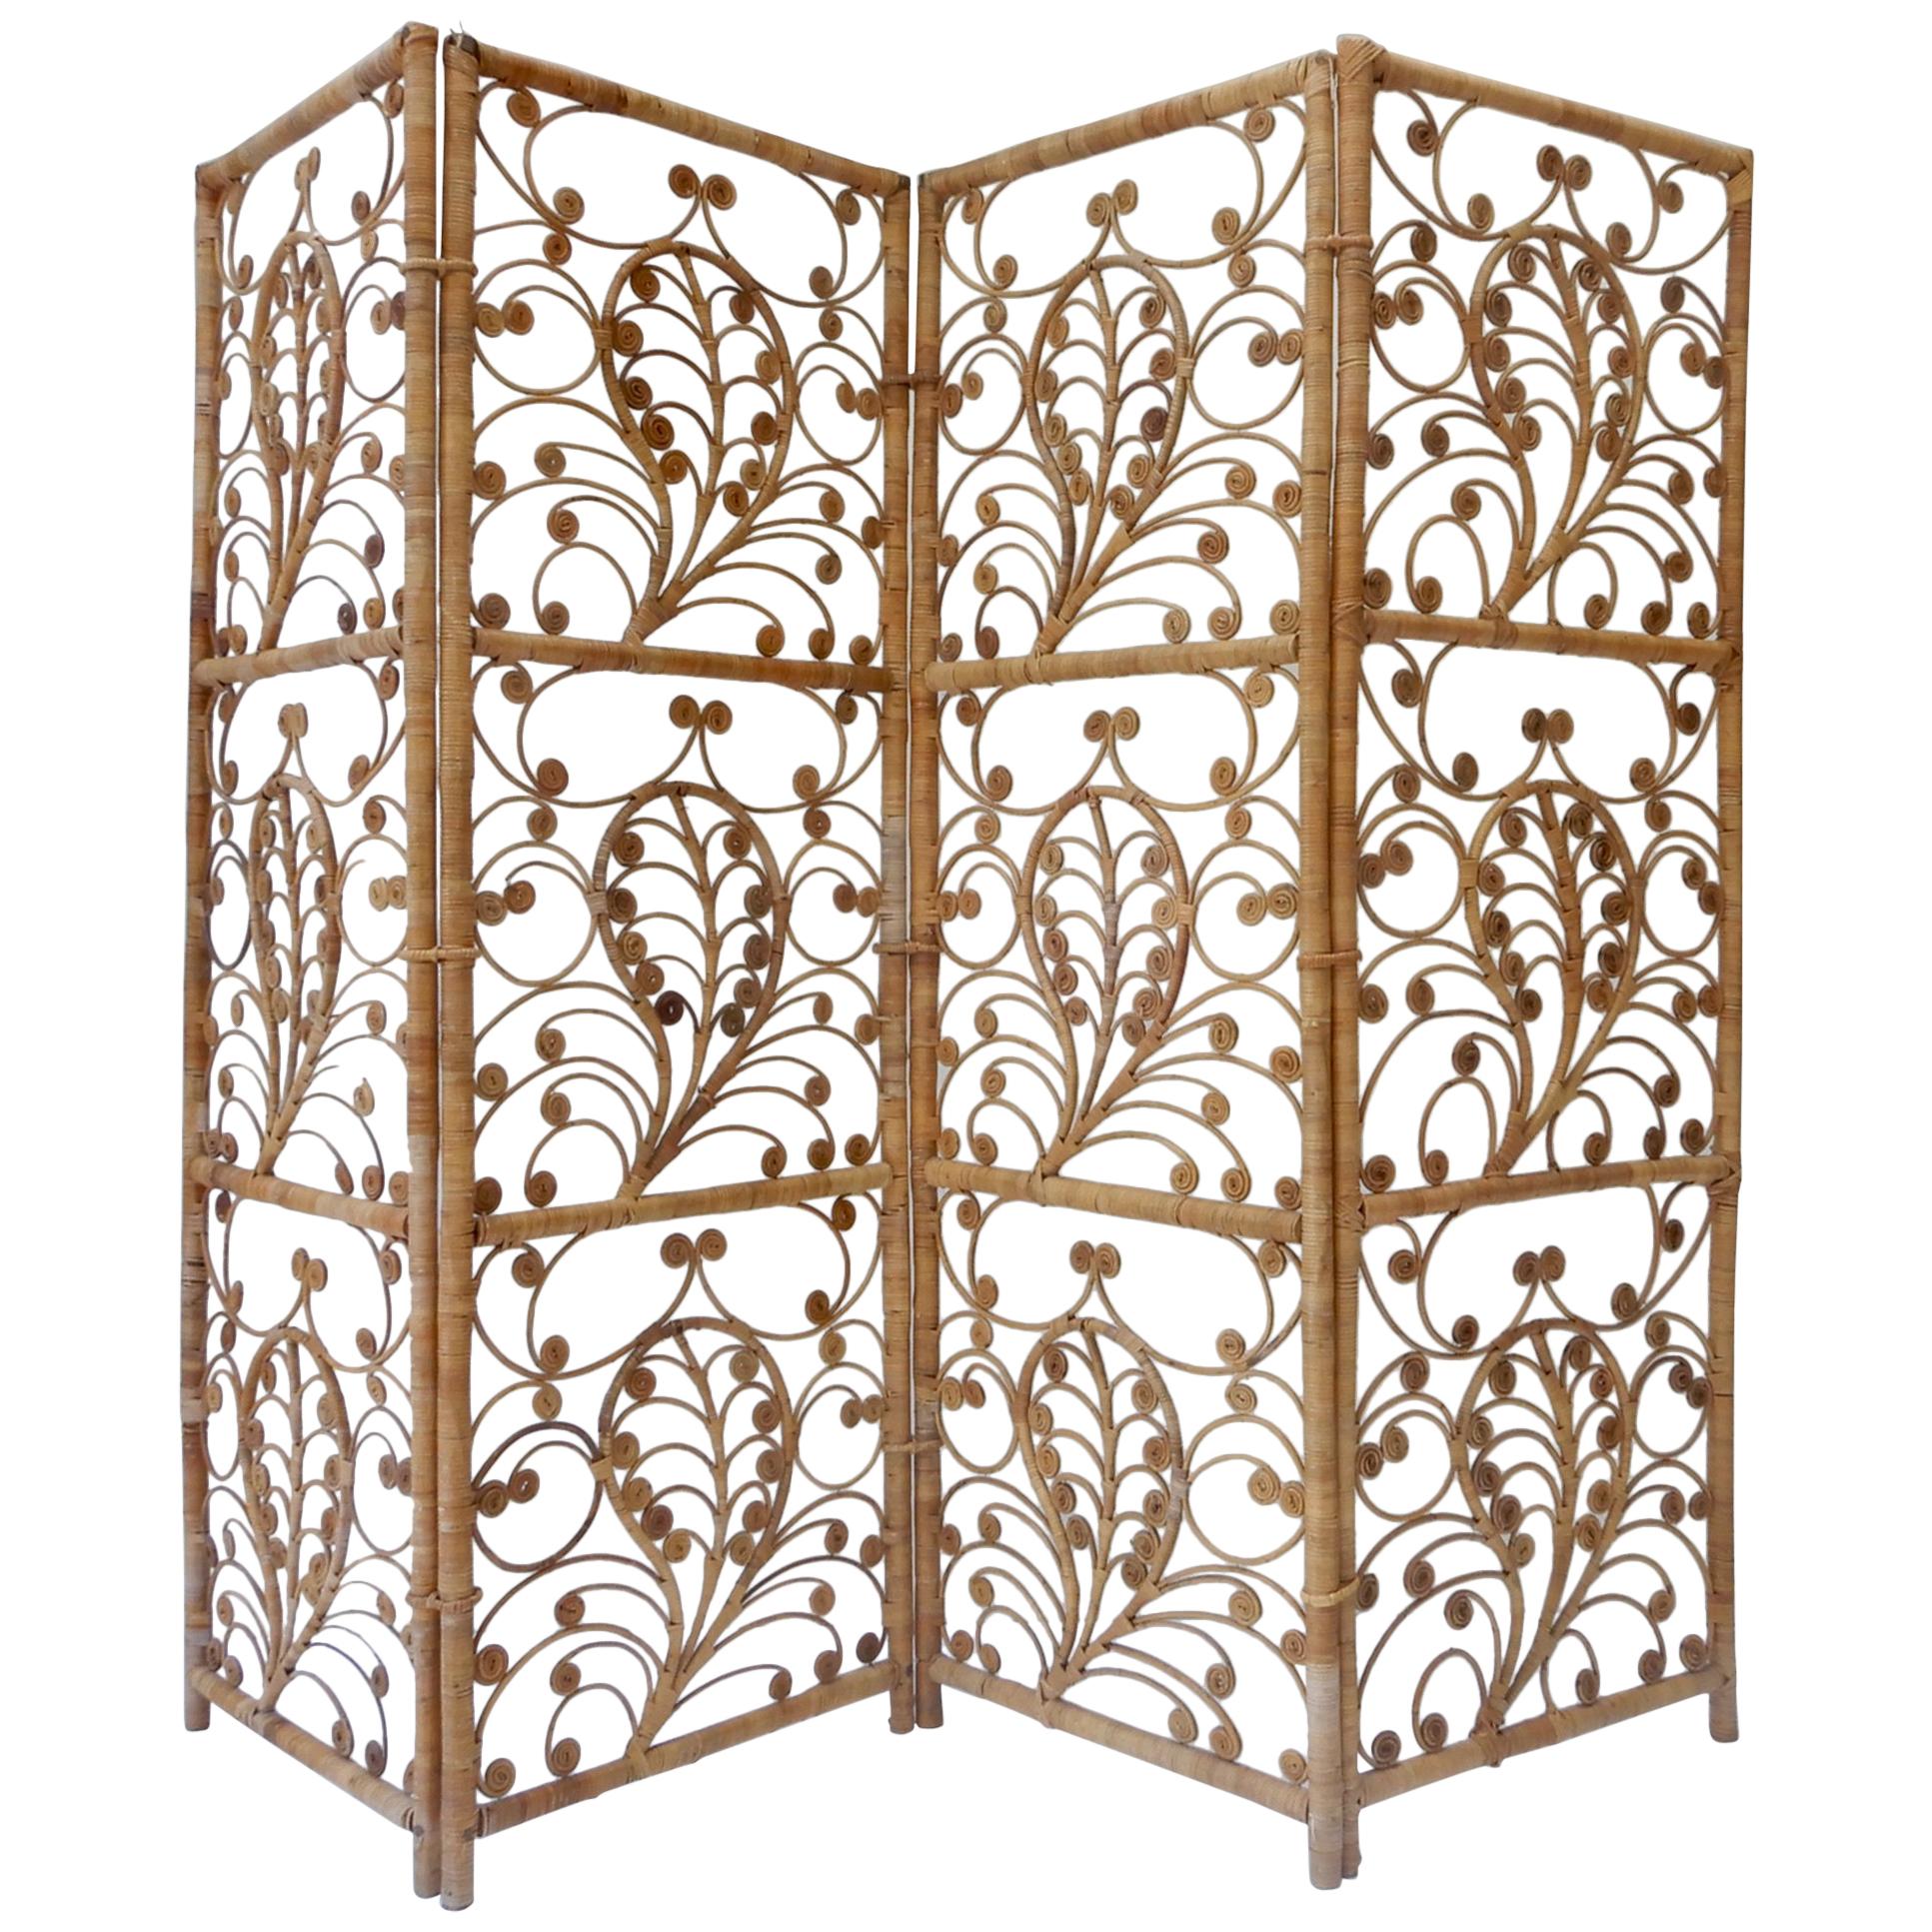 Four-Panel Rattan Screen Room Divider, 1940s For Sale